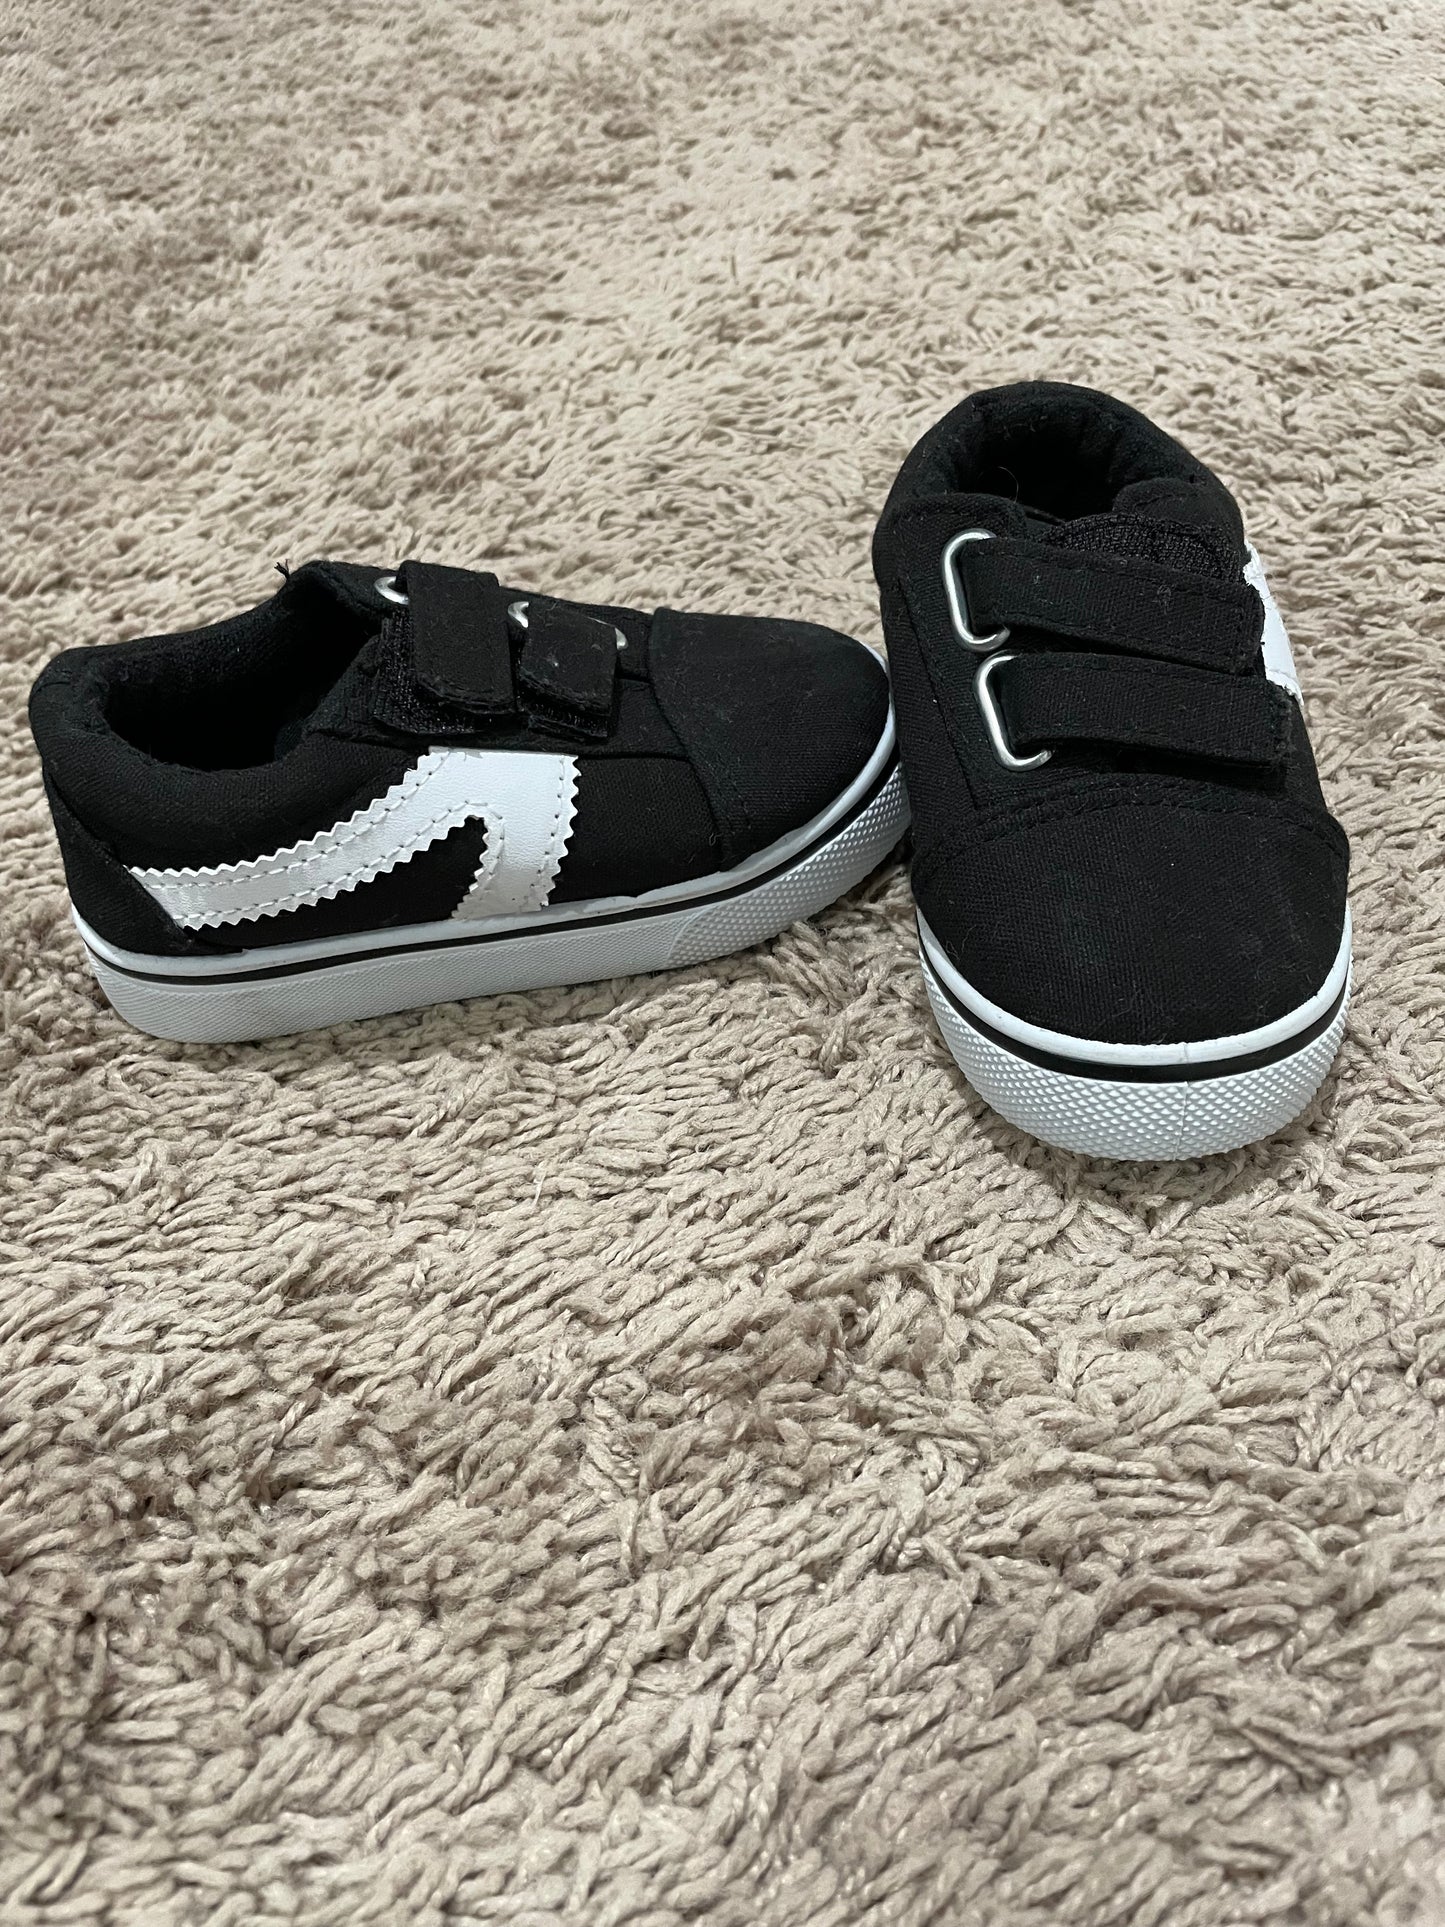 US Sports sneakers - toddler 6